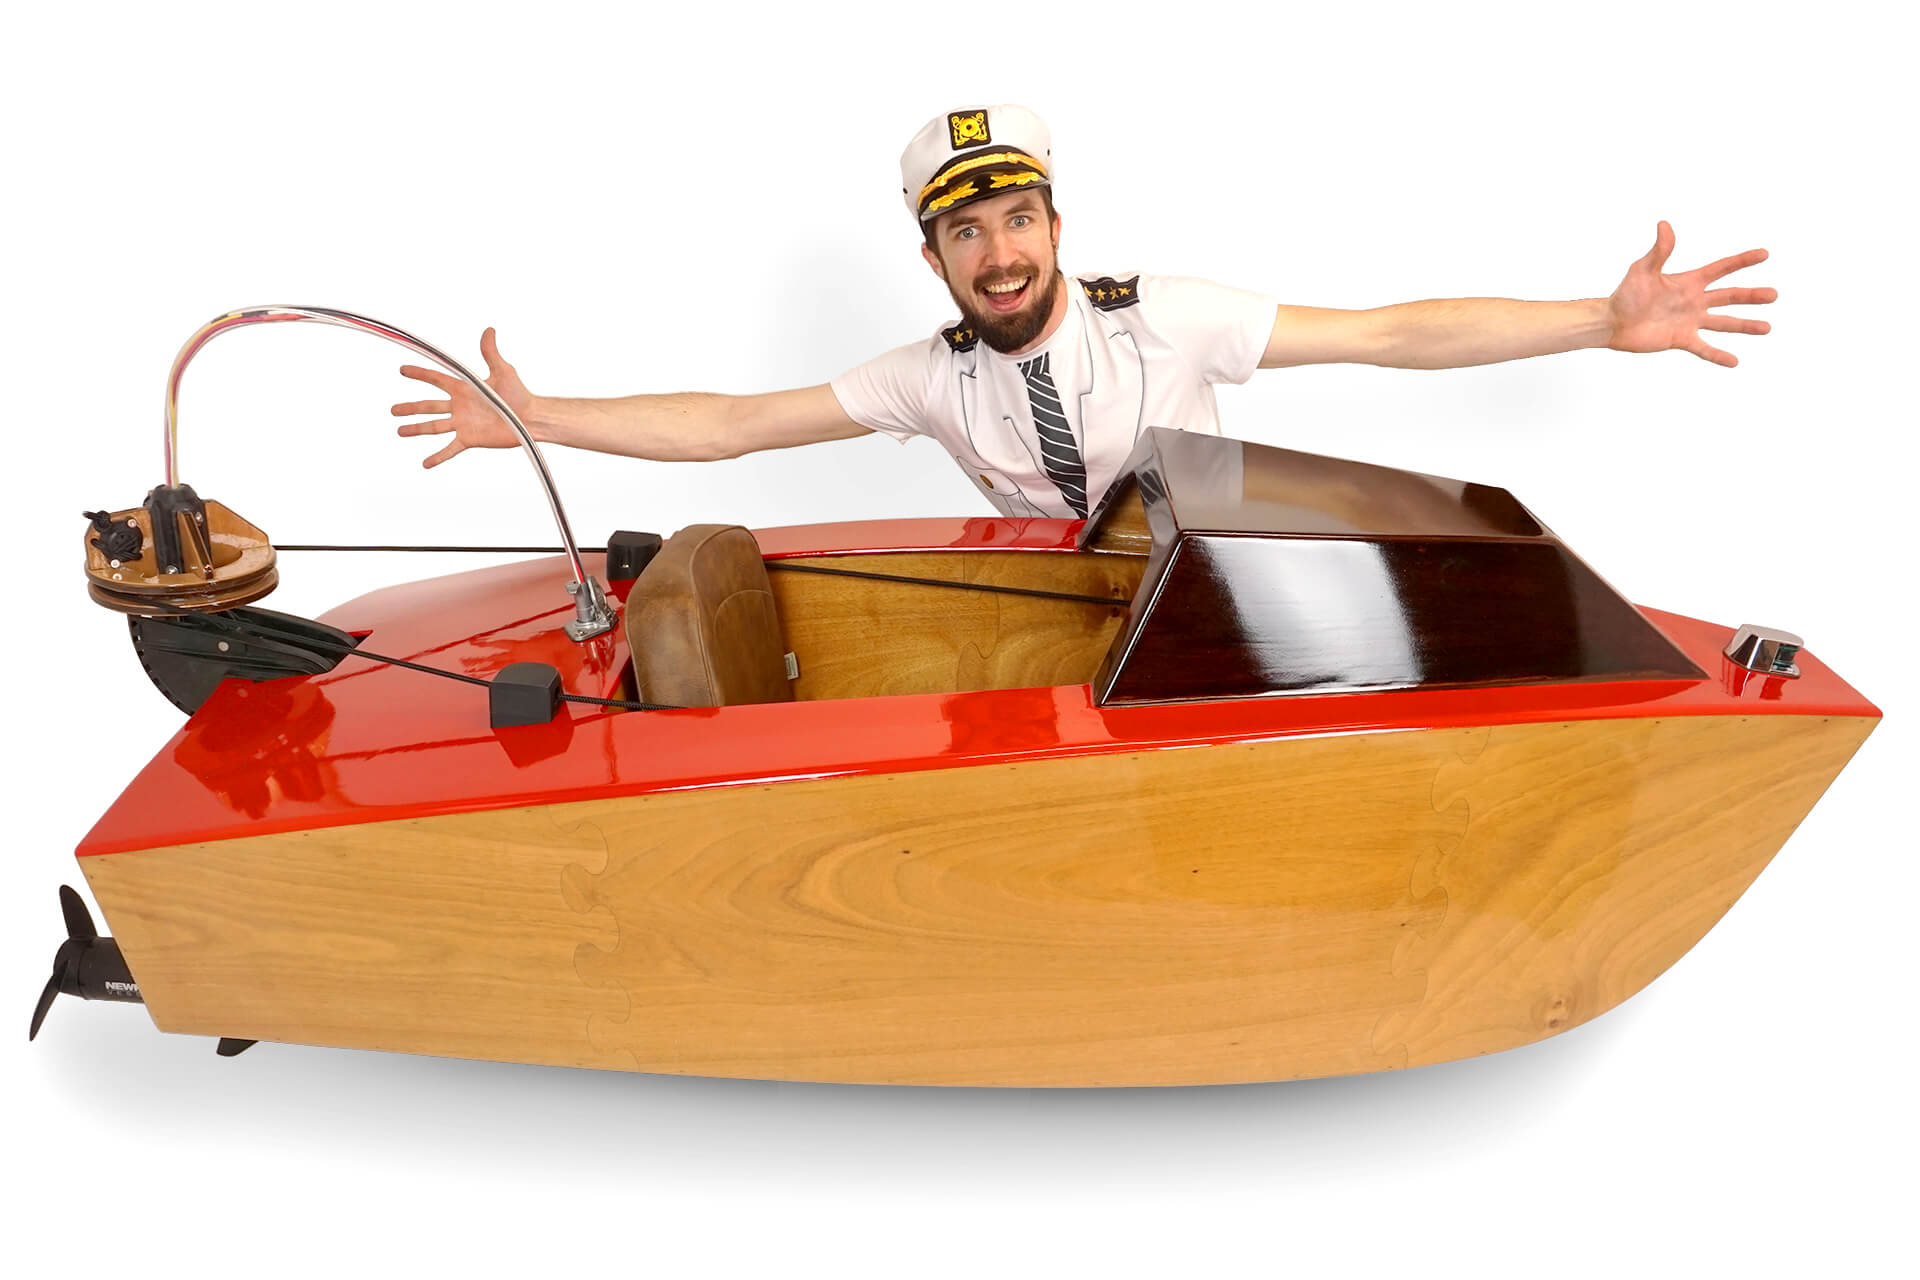 A hero shot of the laser cut mini boat with the creator behind it